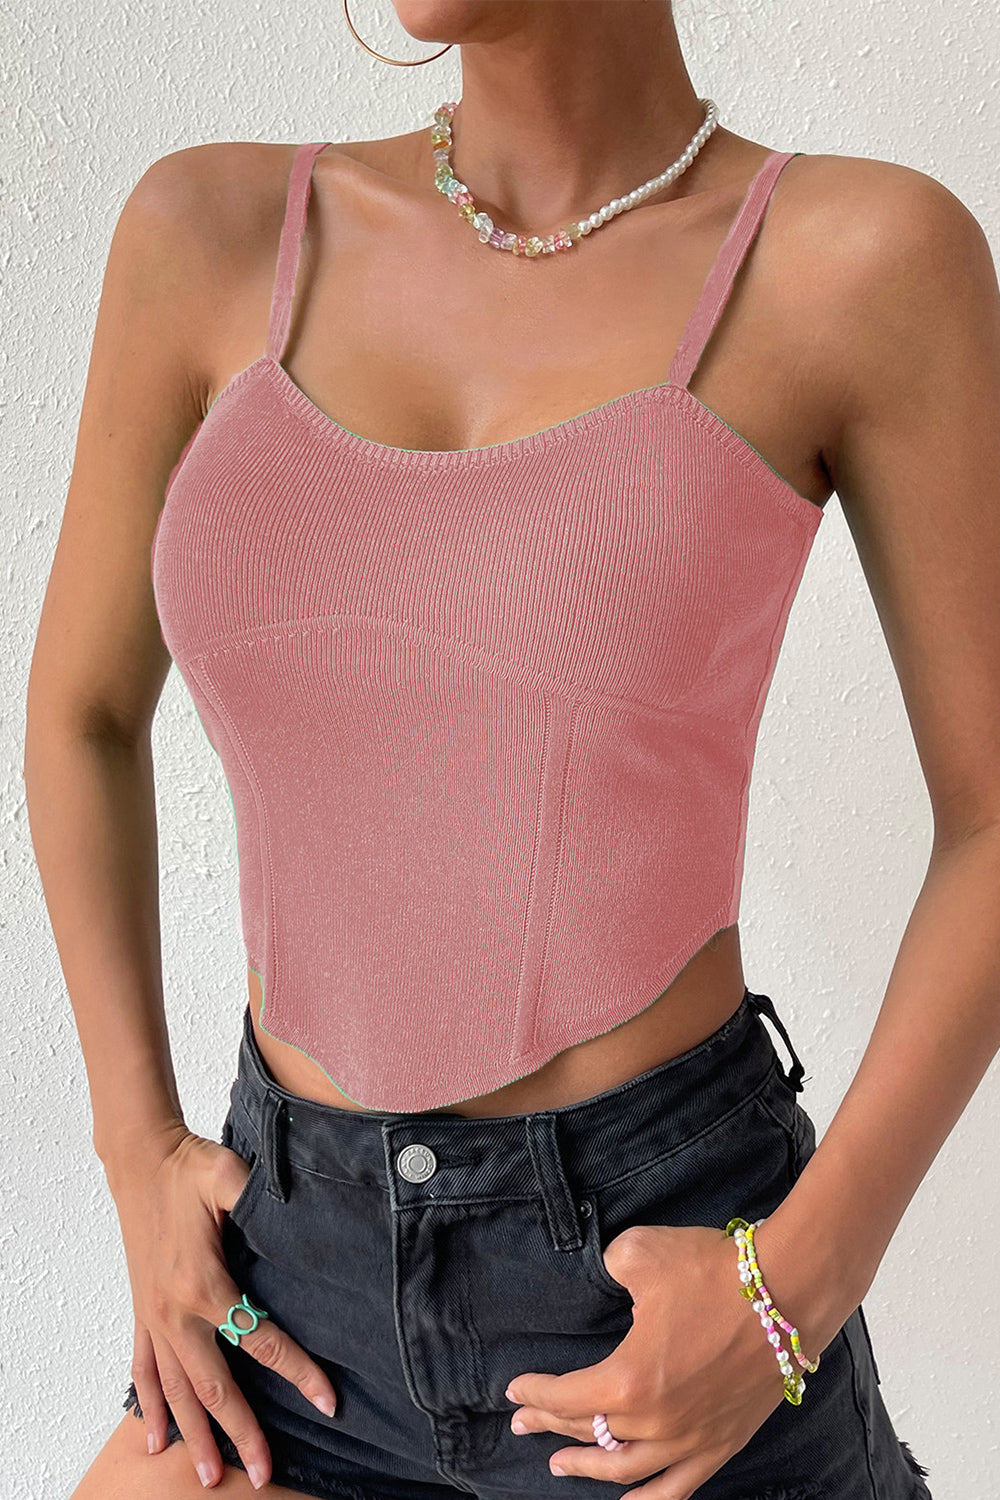 Scoop Neck Tank Top - Light Pink / S - Women’s Clothing & Accessories - Shirts & Tops - 13 - 2024